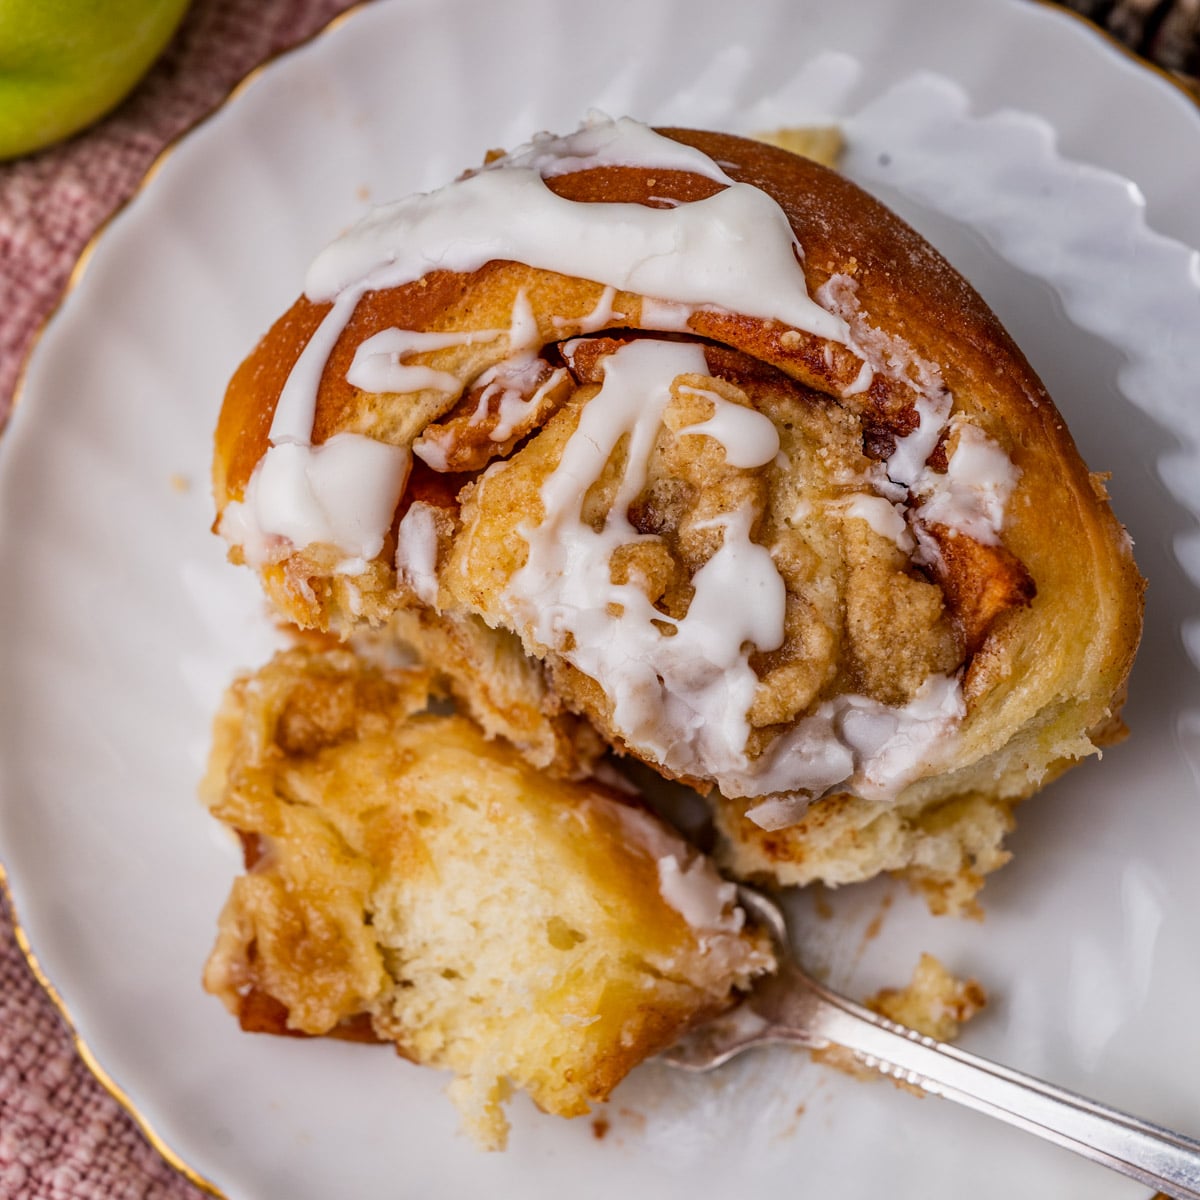 an apple crumble cinnamon roll on a plate with a bite on a fork